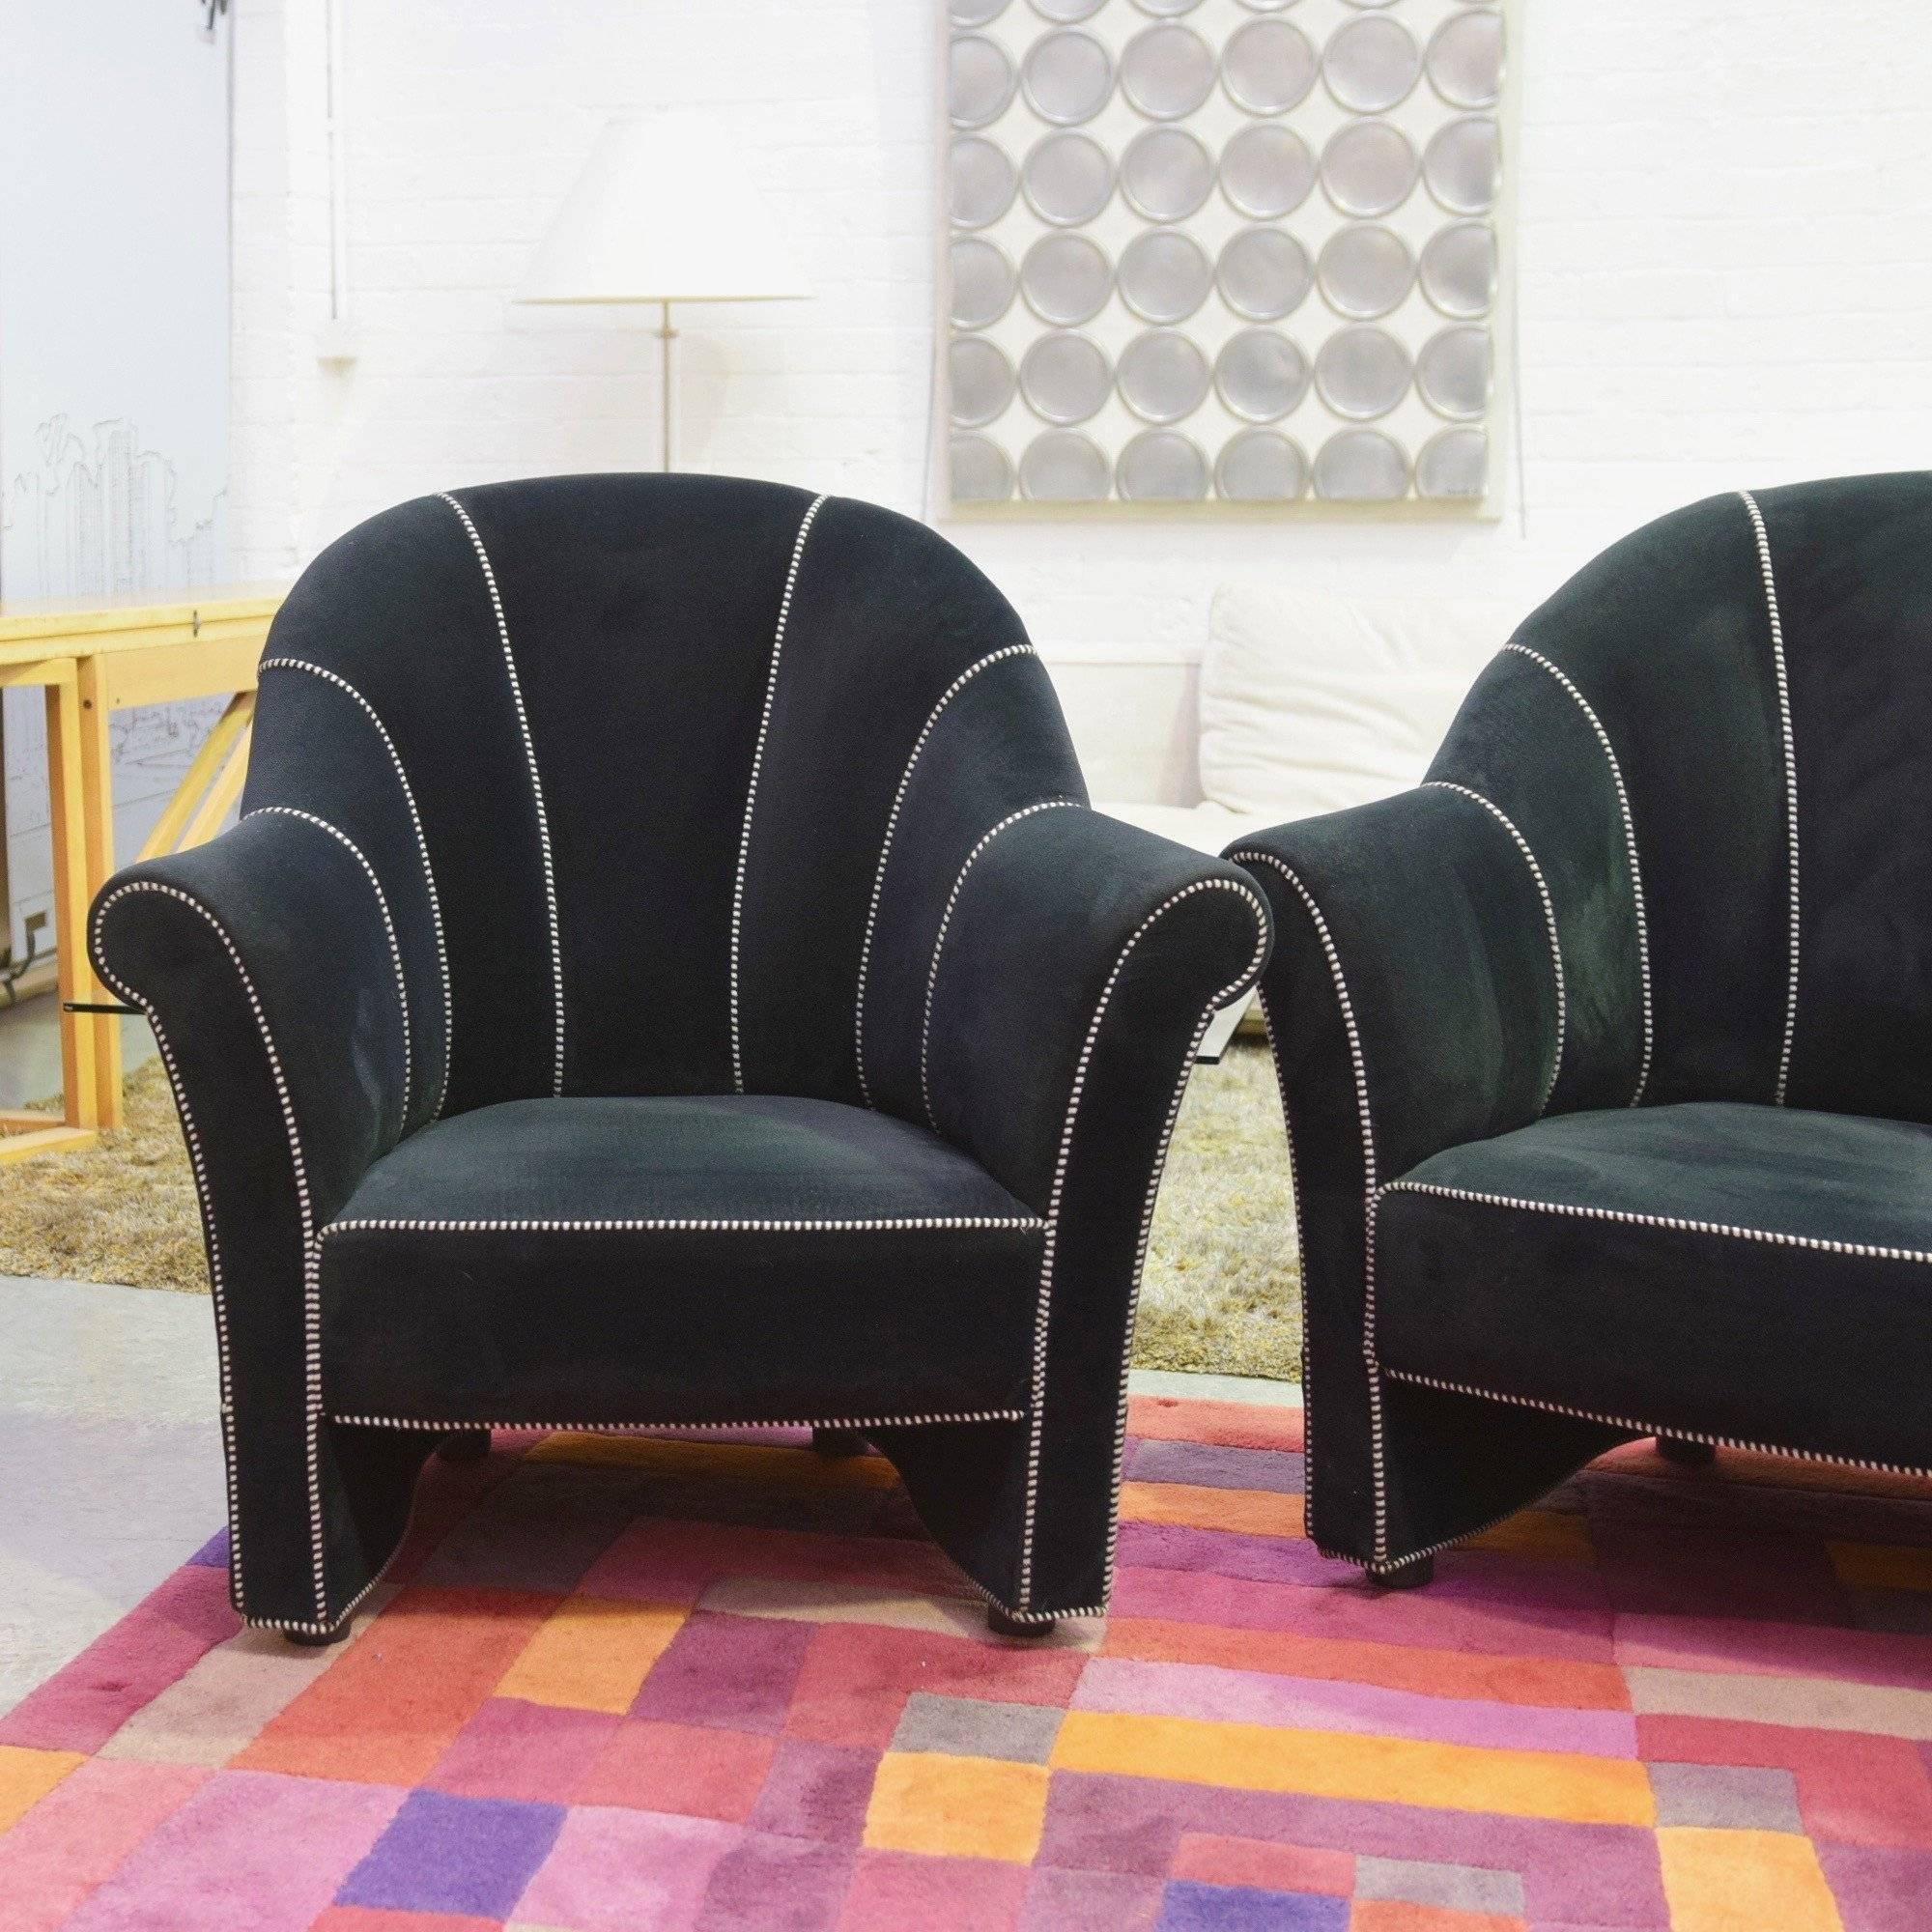 European Pair of Haus Koller Collection Armchairs by Josef Hoffman For Sale